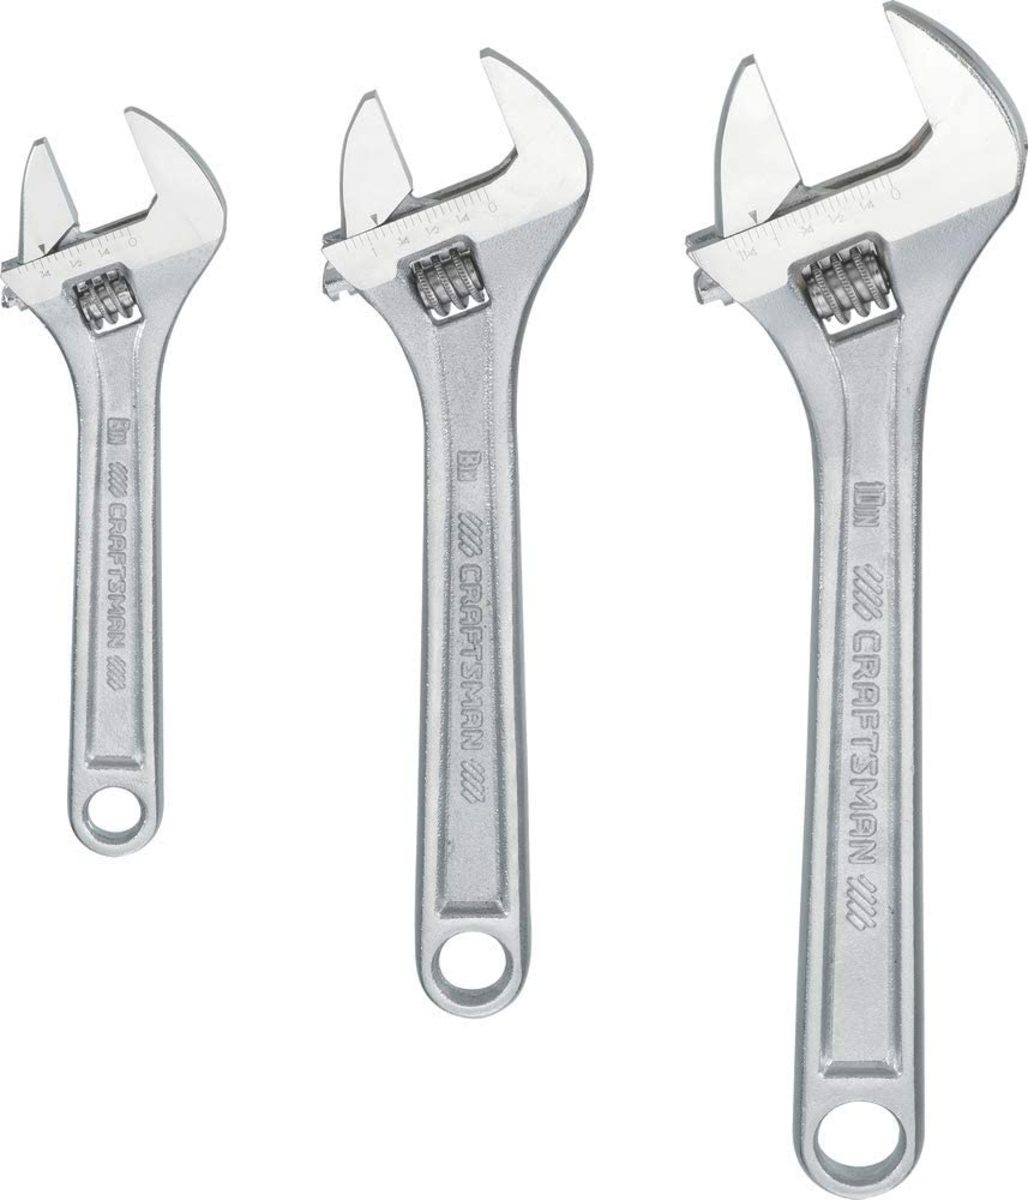 The CRAFTSMAN Adjustable Wrench Set, 3-Piece.